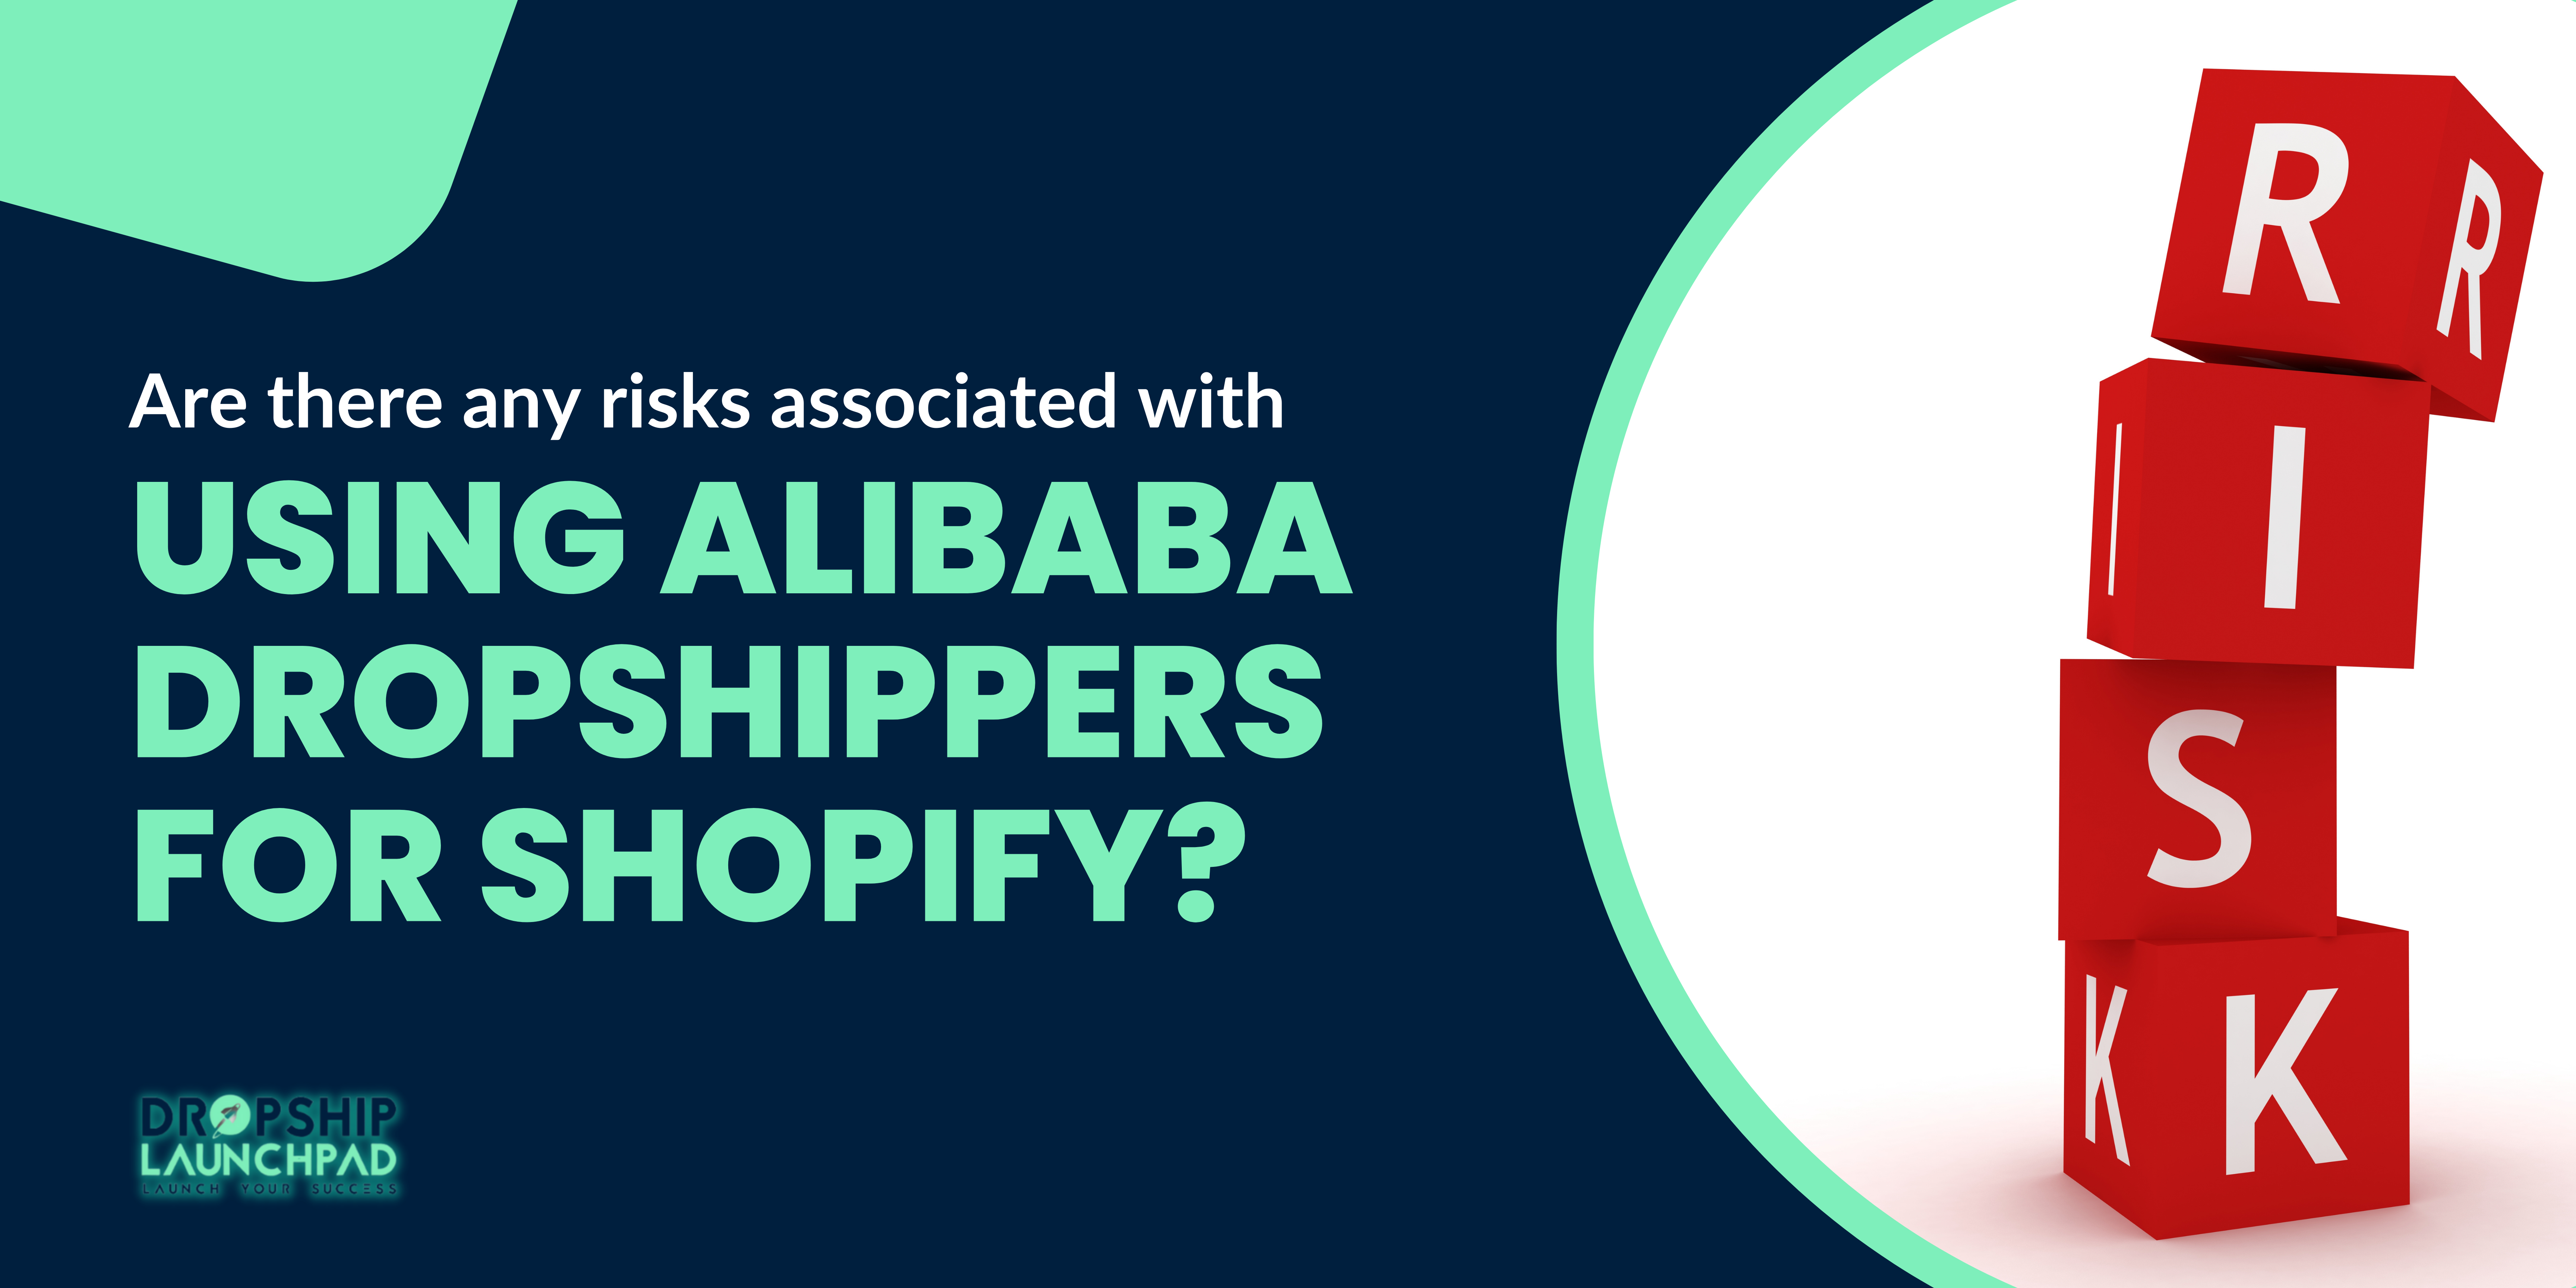 Are there any risks associated with using Alibaba dropshippers for Shopify